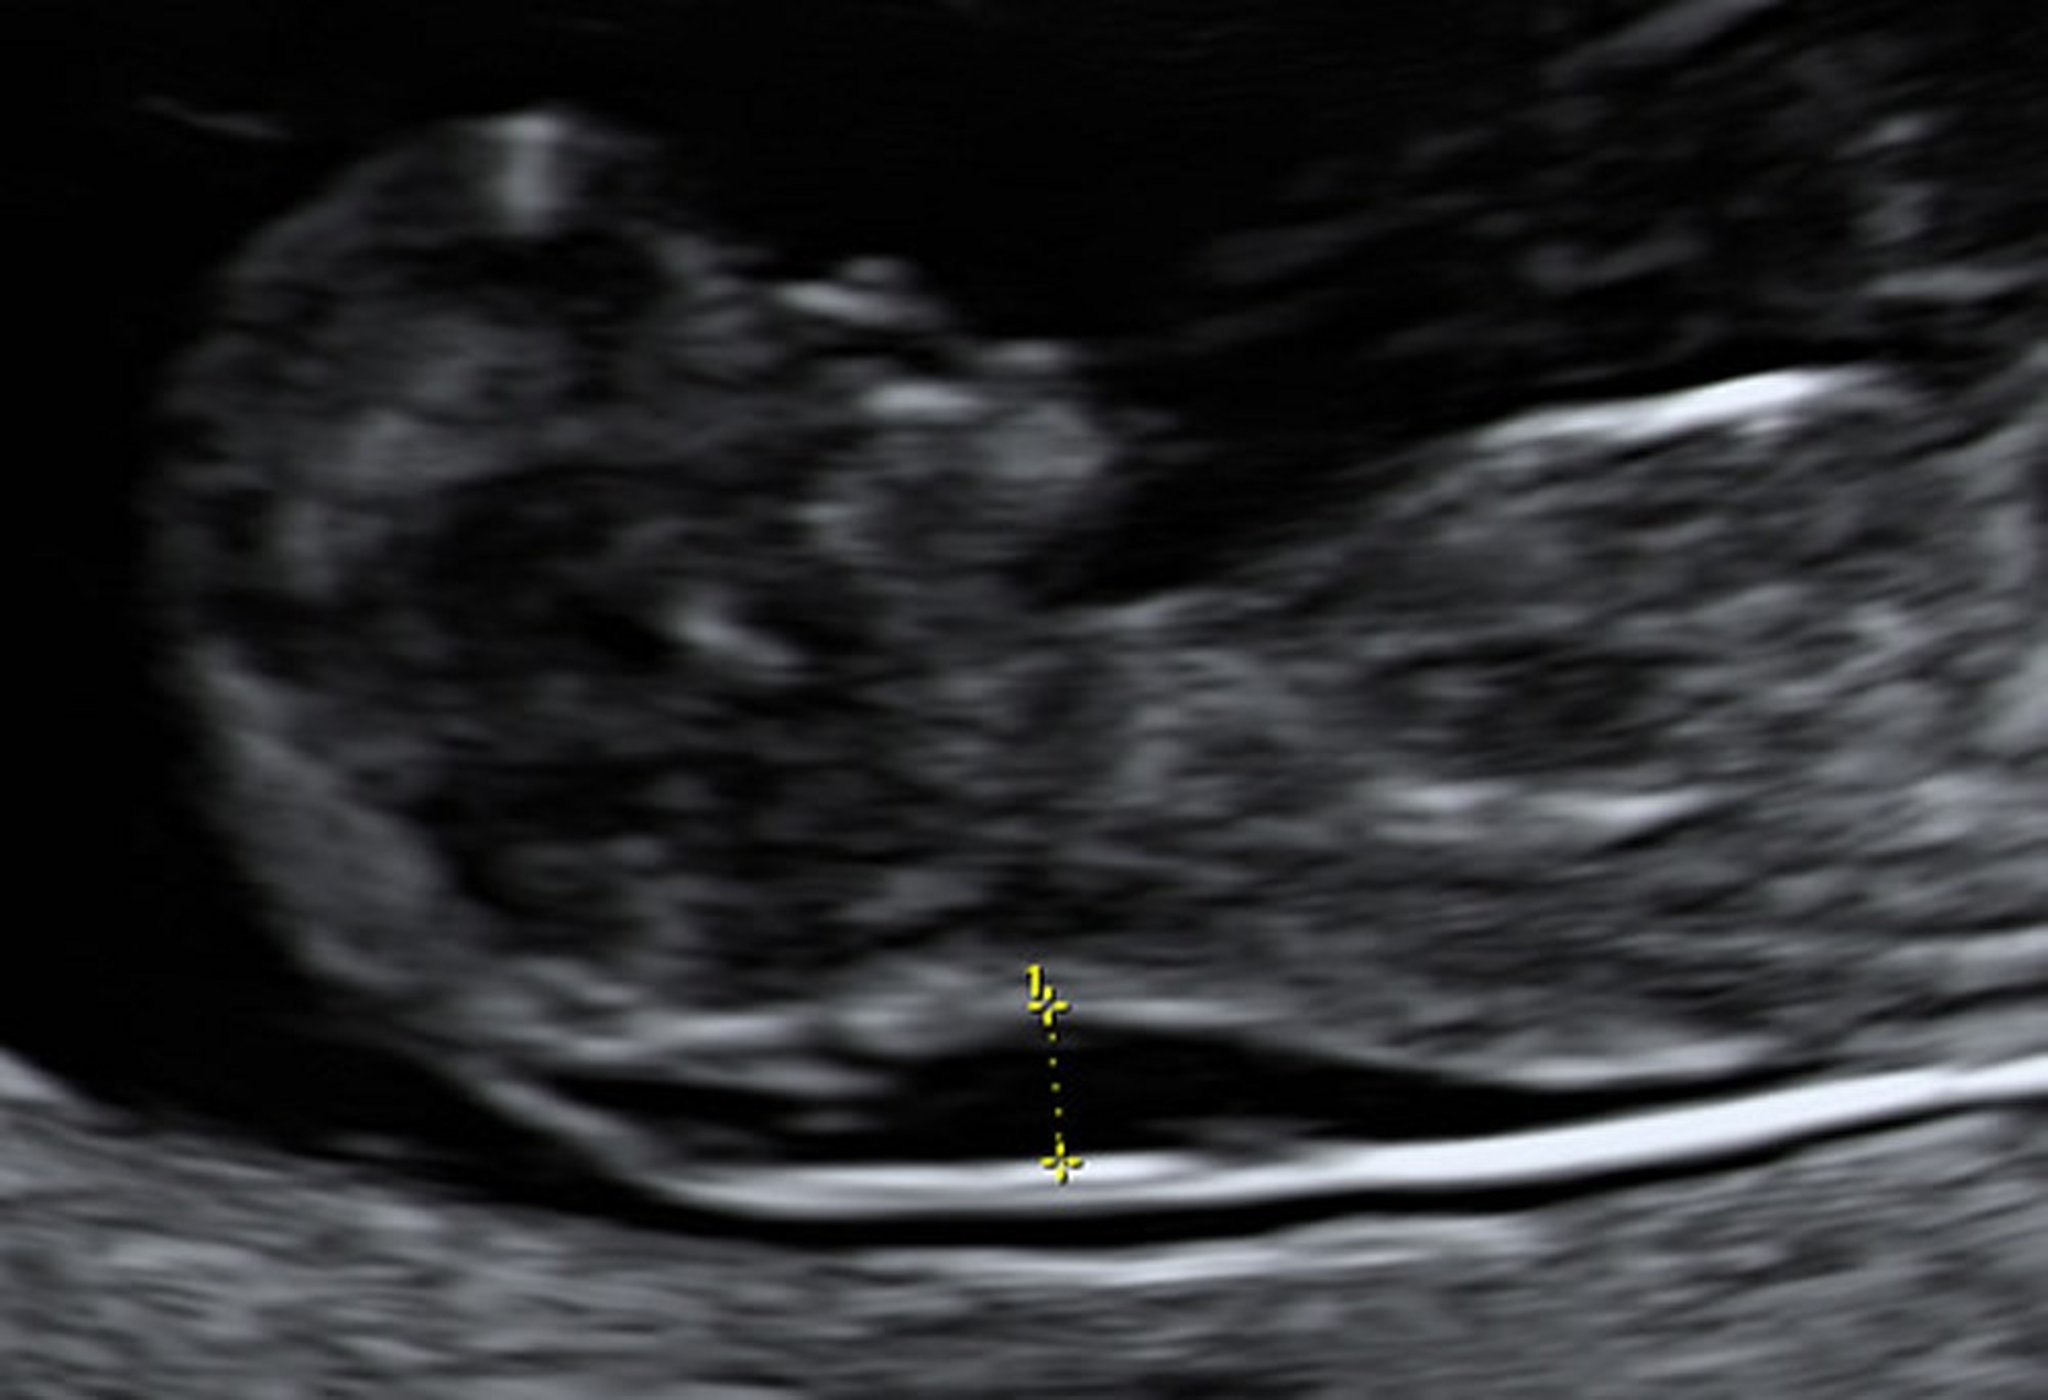 Ultrasonography Showing Enlarged Nuchal Translucency in a Fetus at 10 Weeks